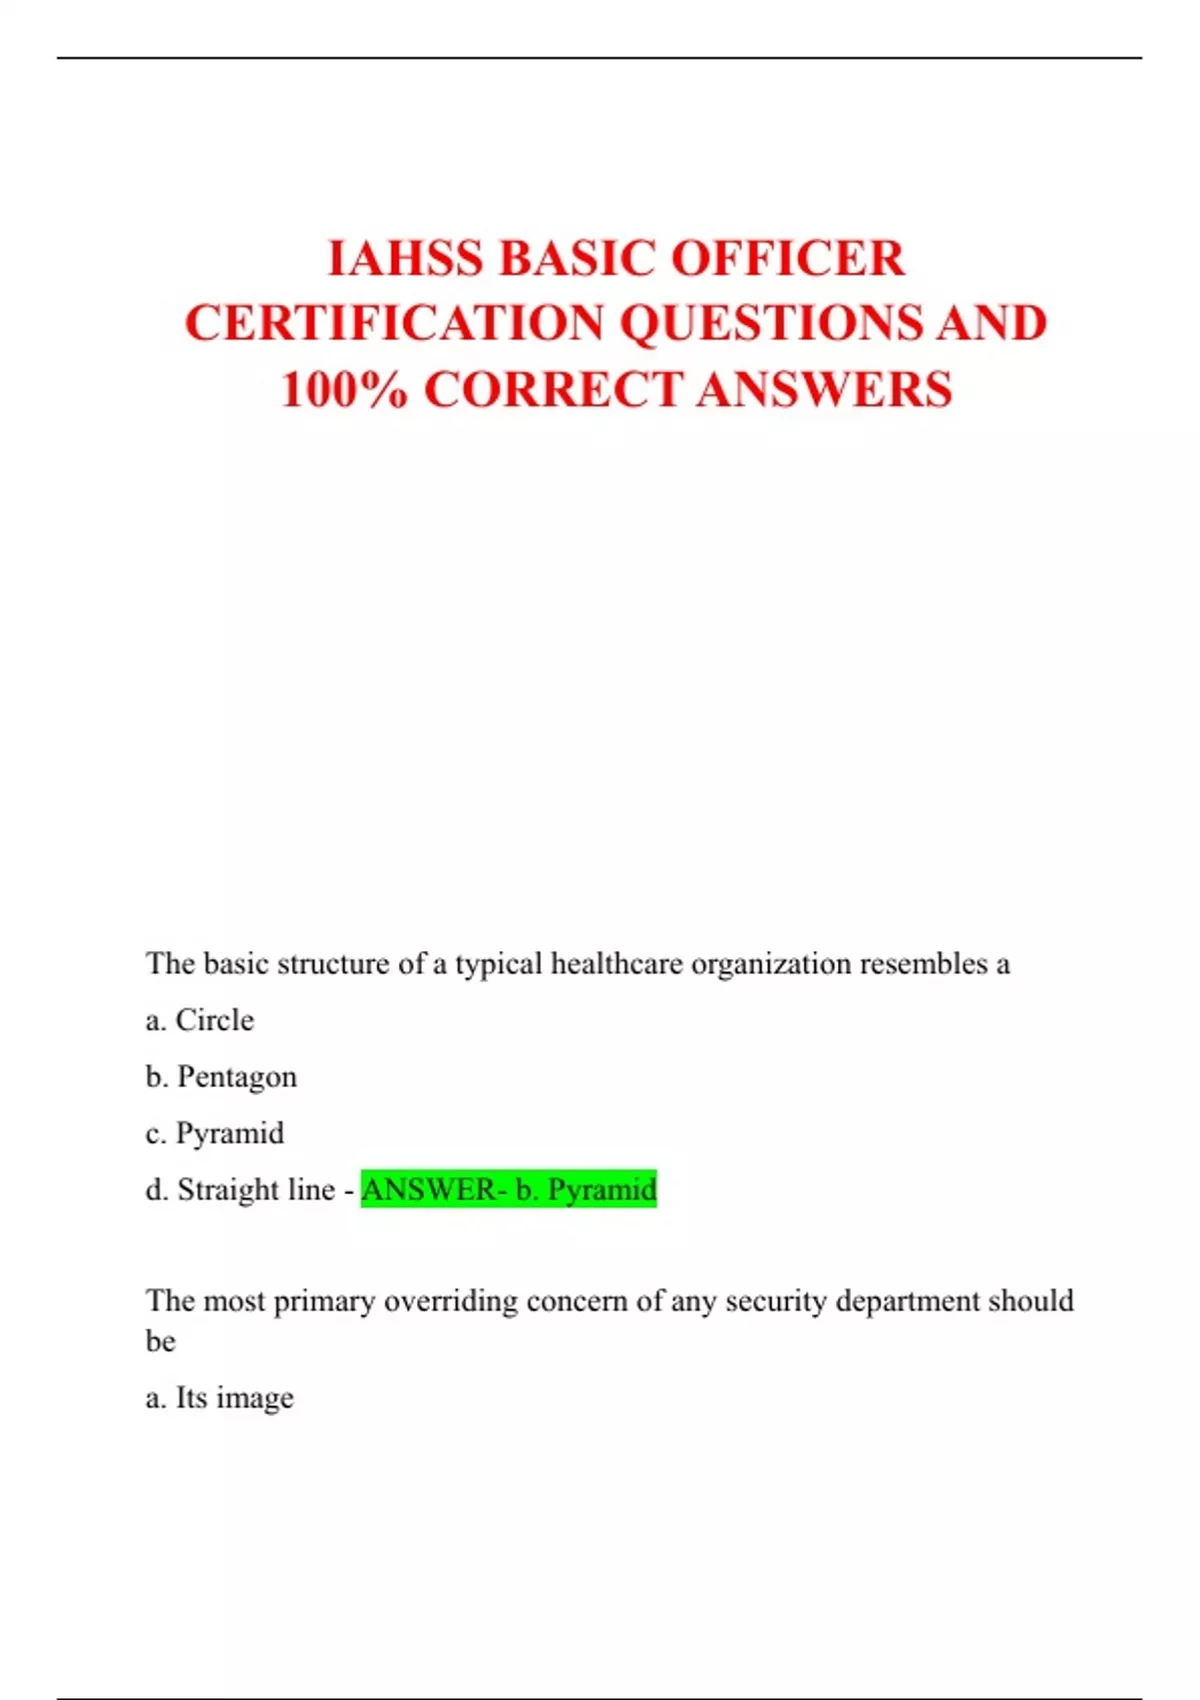 IAHSS BASIC OFFICER CERTIFICATION QUESTIONS AND 100% CORRECT ANSWERS